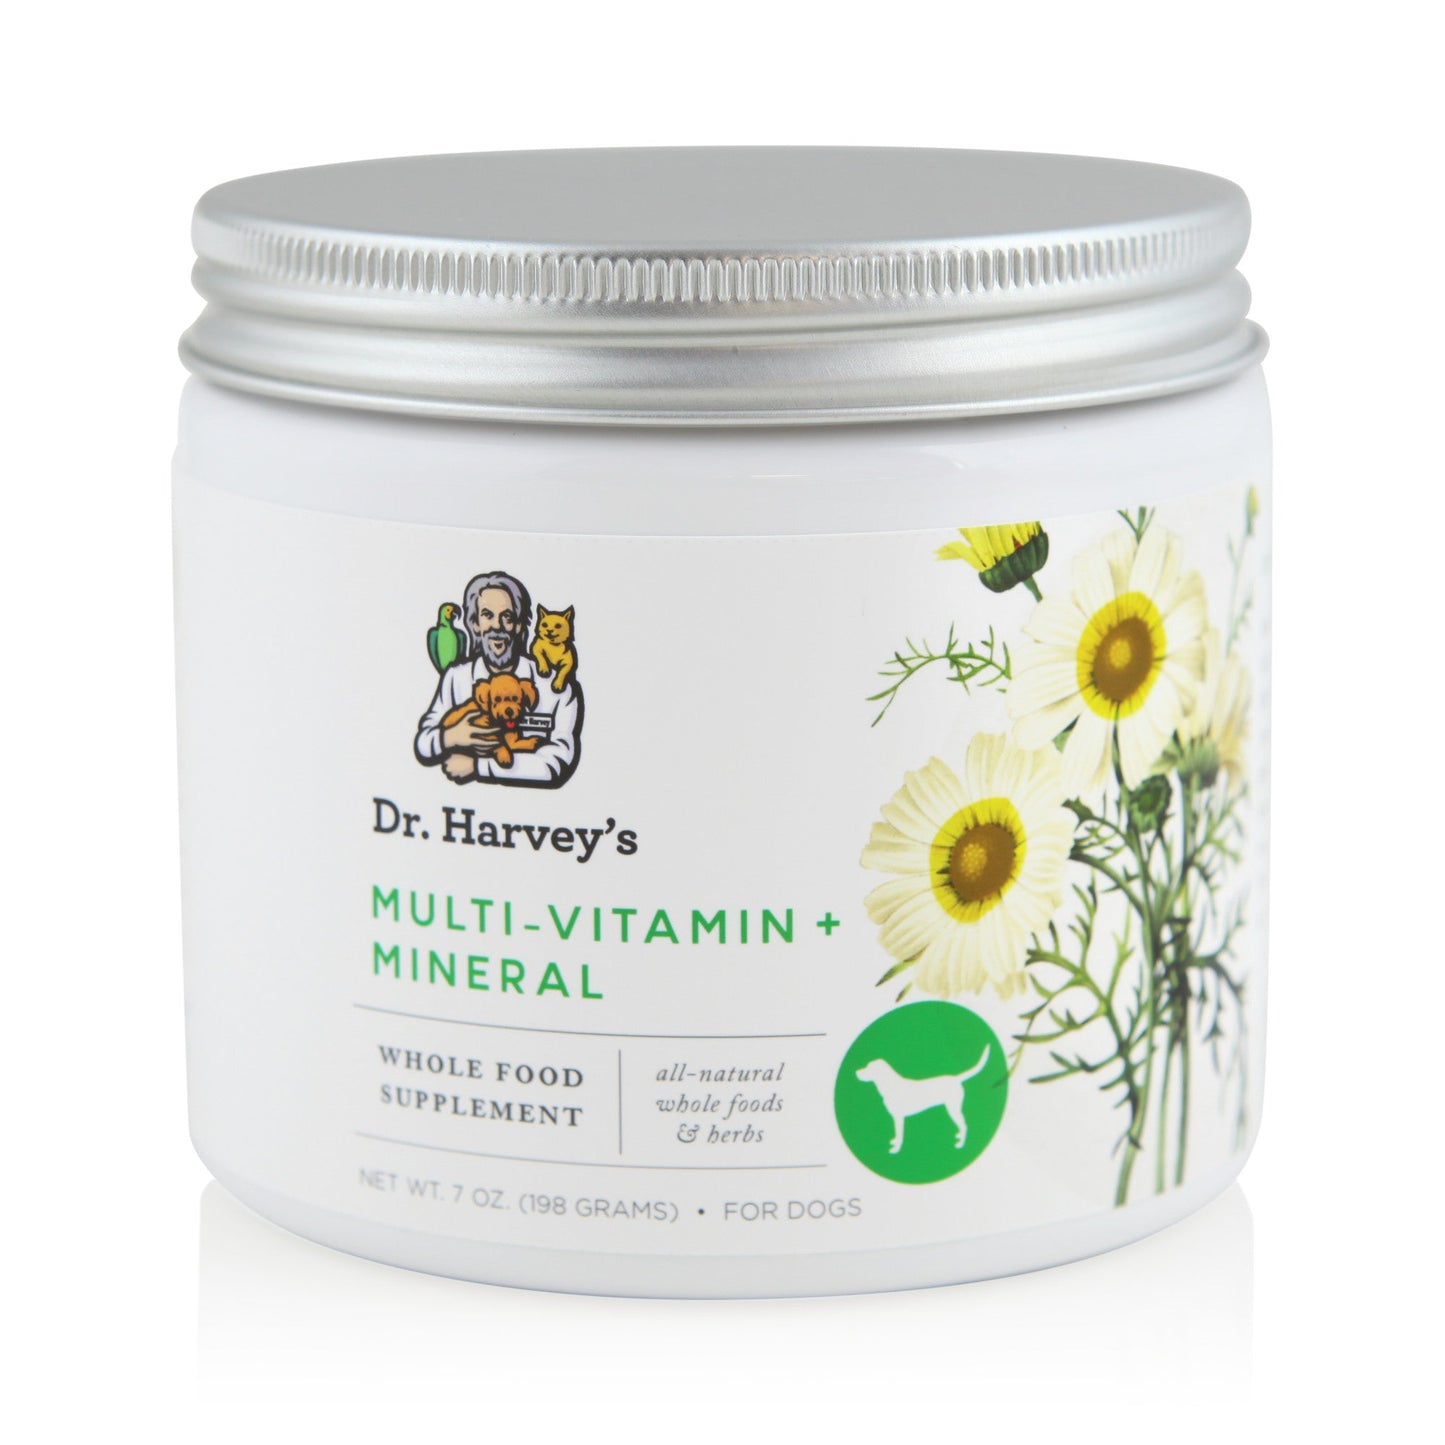 Dr. Harvey's Herbal Multi-Vitamin and Mineral Supplement for Dogs